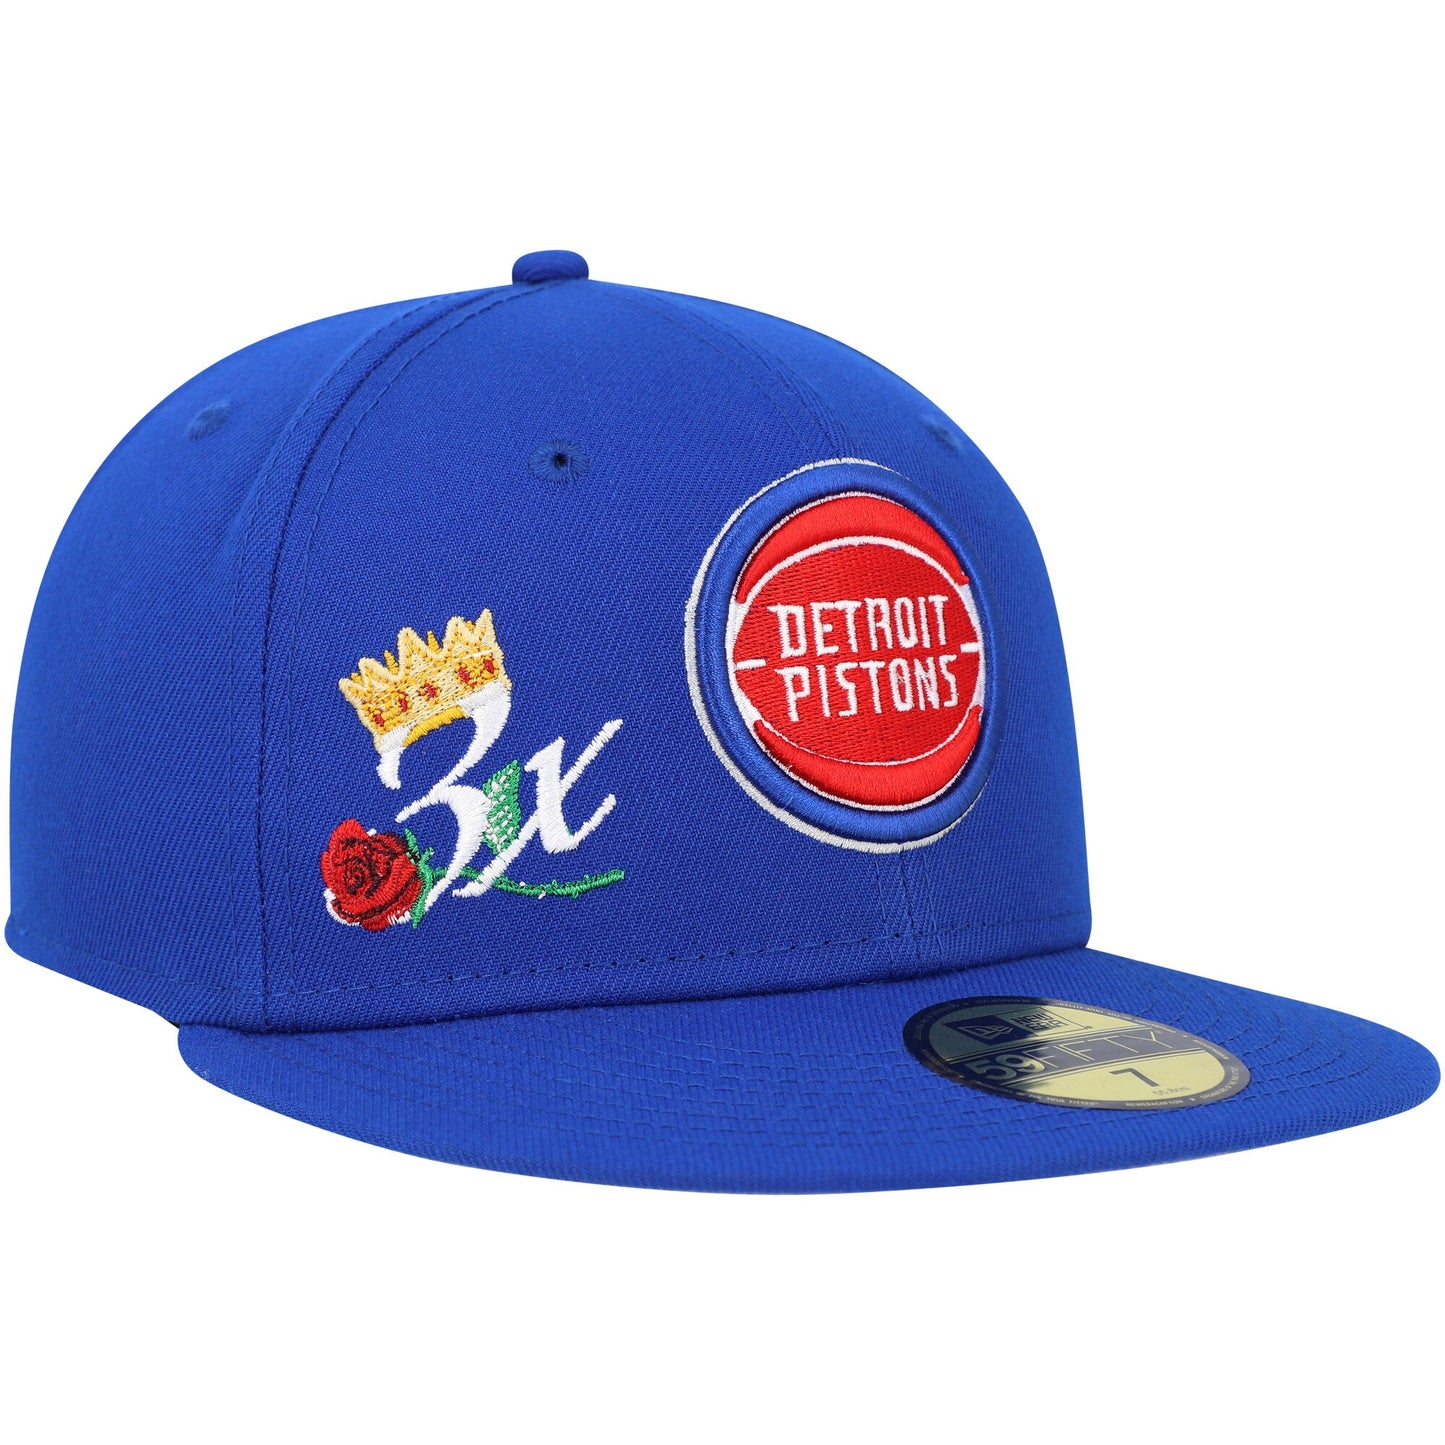 Detroit Pistons New Era Crown Champs 59FIFTY Fitted Hat - Blue